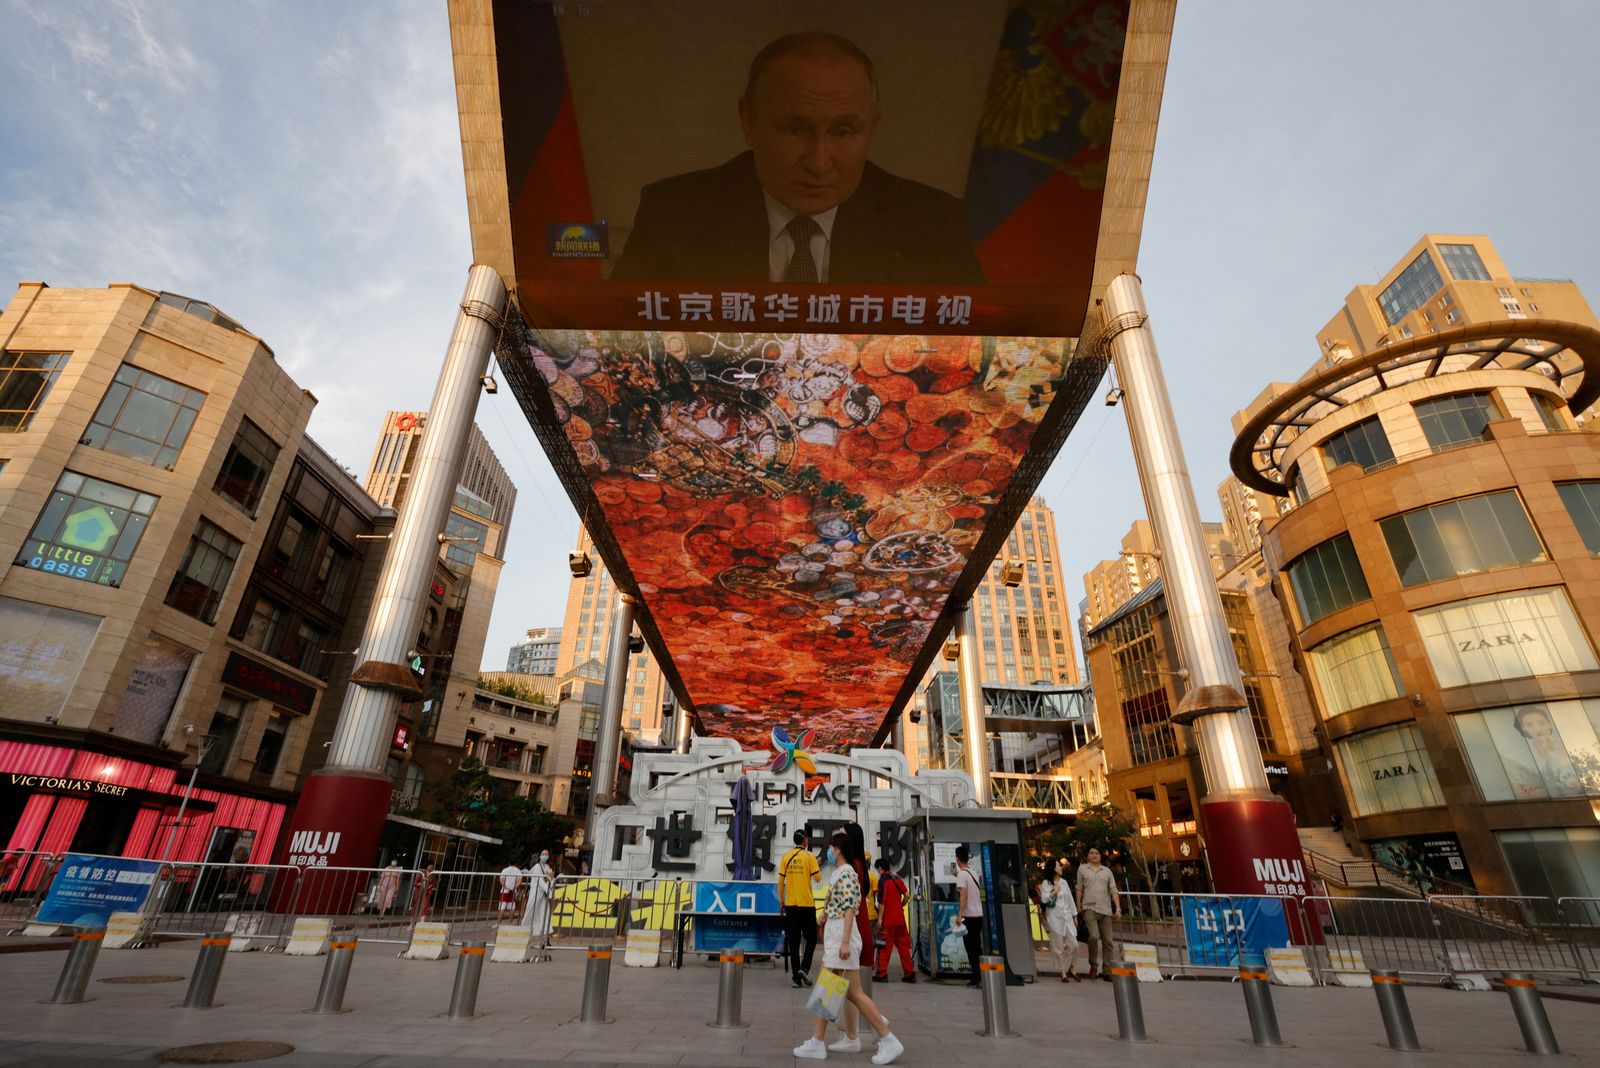 A screen shows a CCTV state media news broadcast of Russian President Vladimir Putin, addressing the BRICS Business Forum via video link, at a shopping center in Beijing - REUTERS